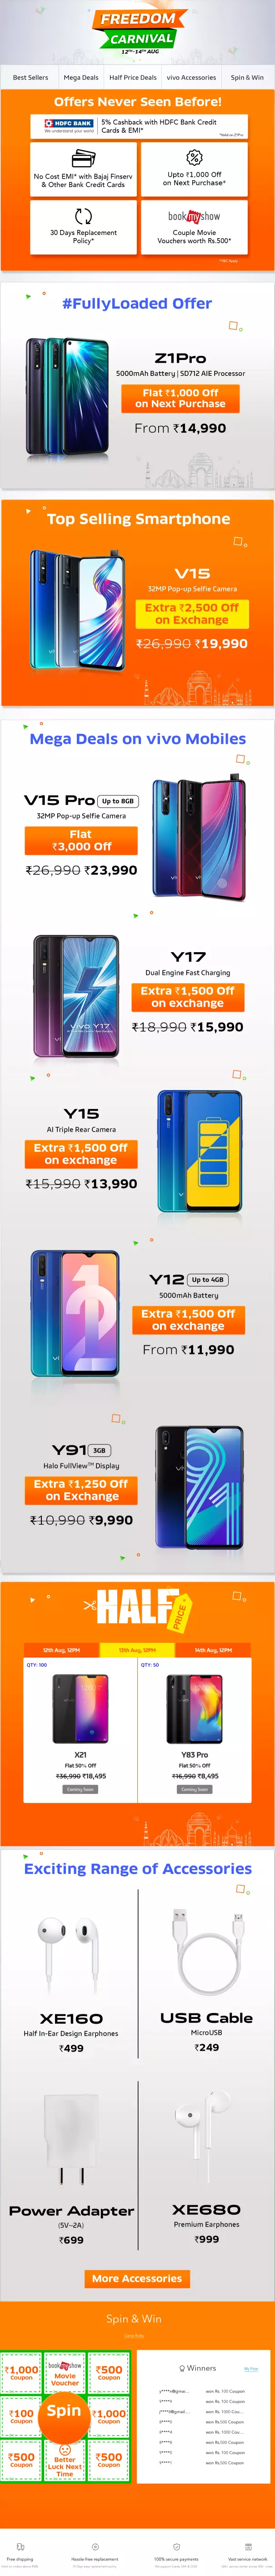 vivo e carnival independence day offers